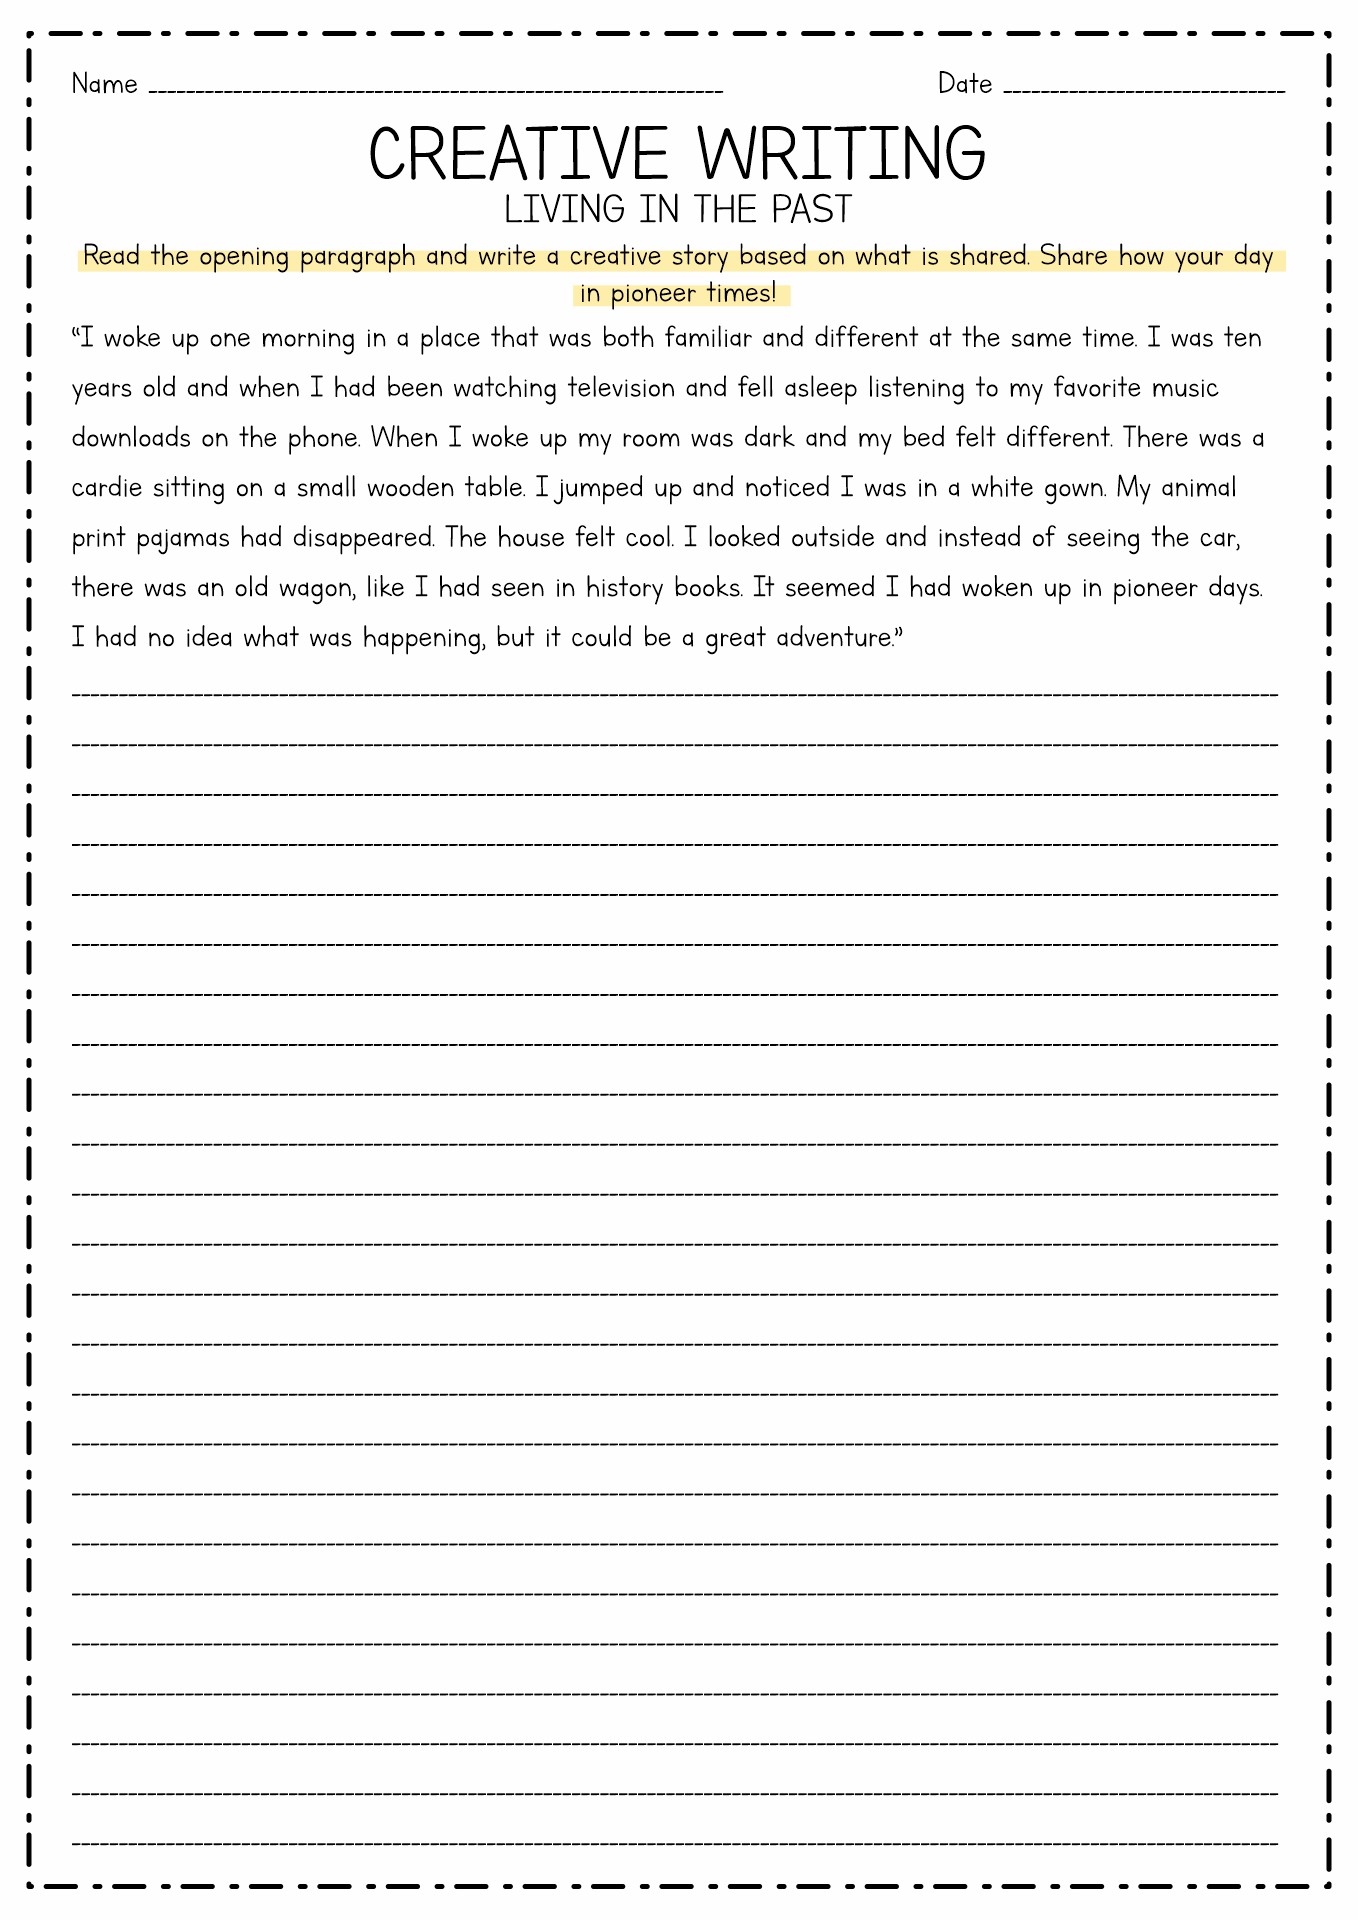 18 Best Images of 4th Grade Essay Writing Worksheets - Free Creative